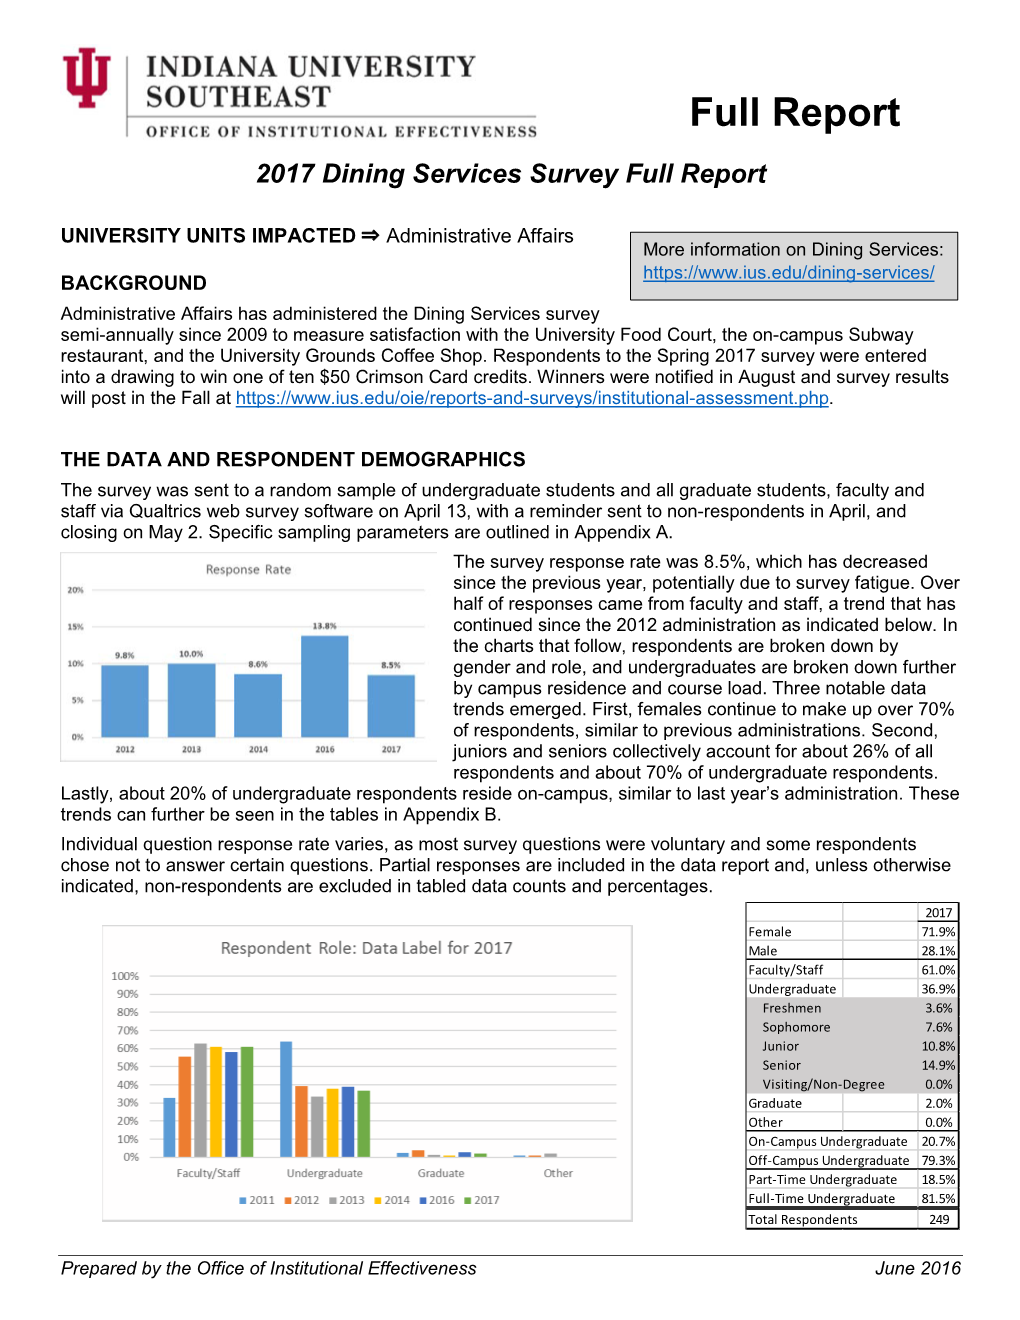 2017 Dining Services Full Report